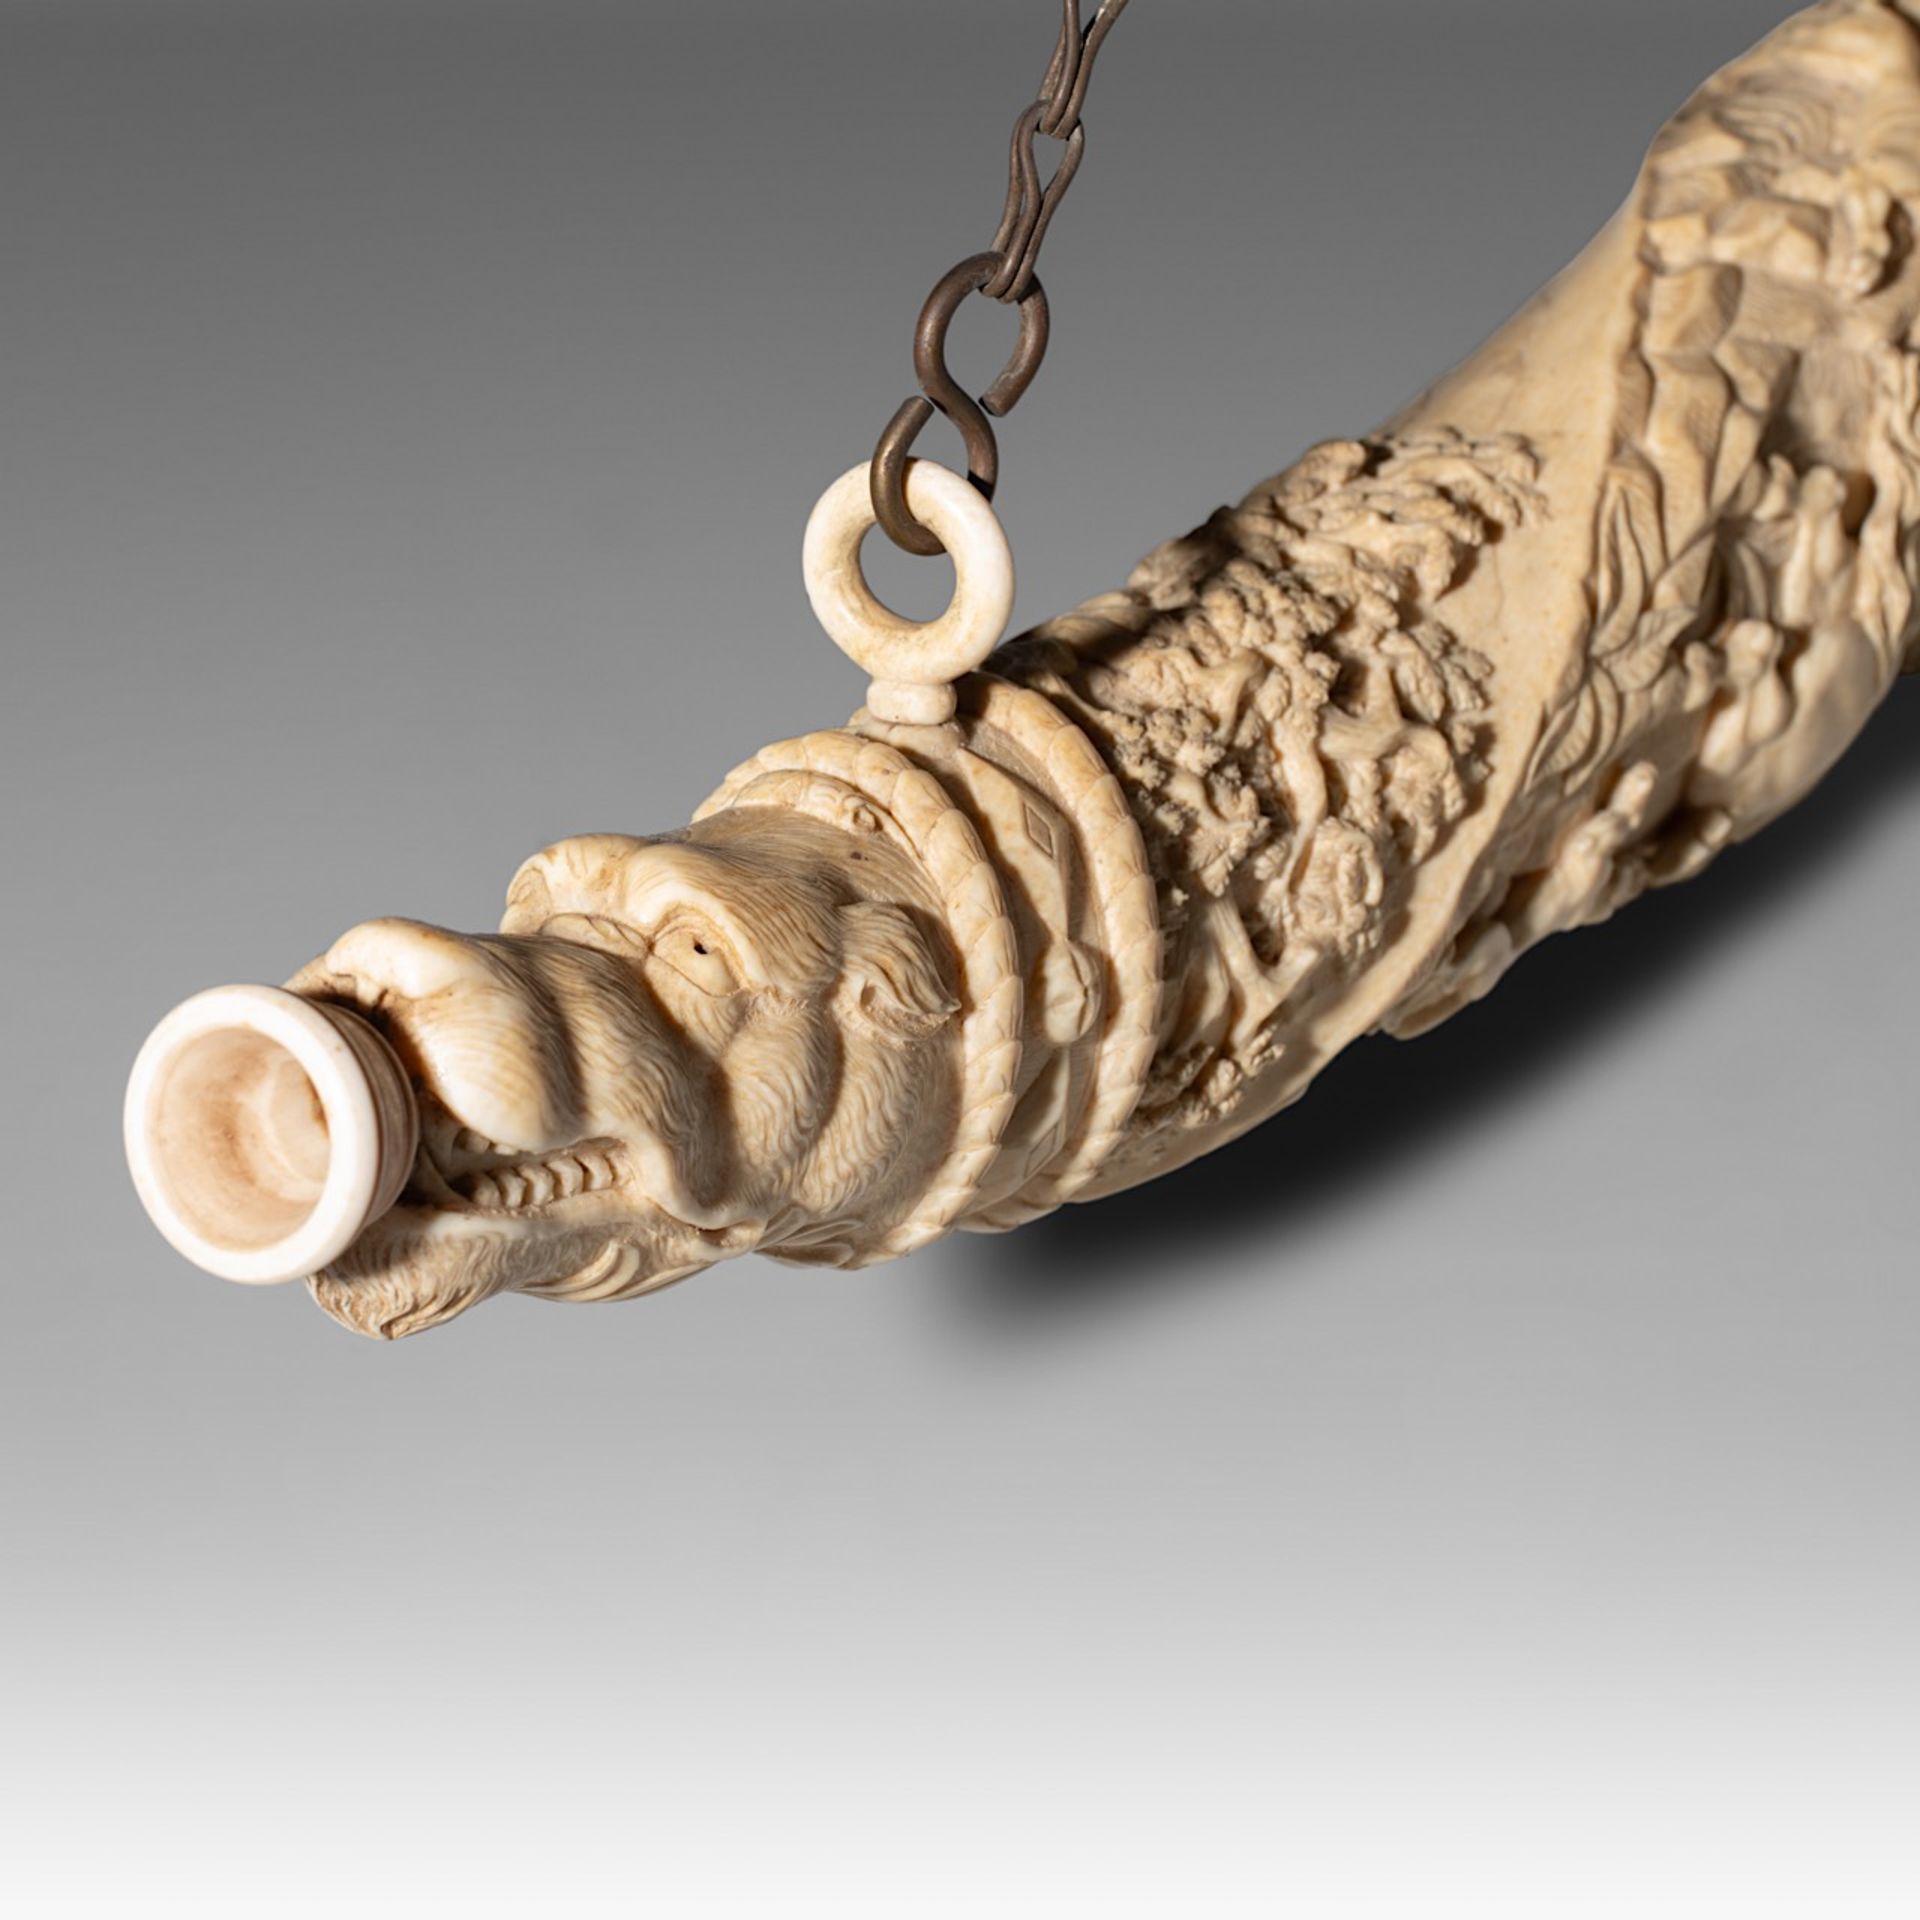 A 19th-century ivory hunting horn, last quarter 19th century, W 74,5 cm - 2850 g (+) - Image 7 of 11